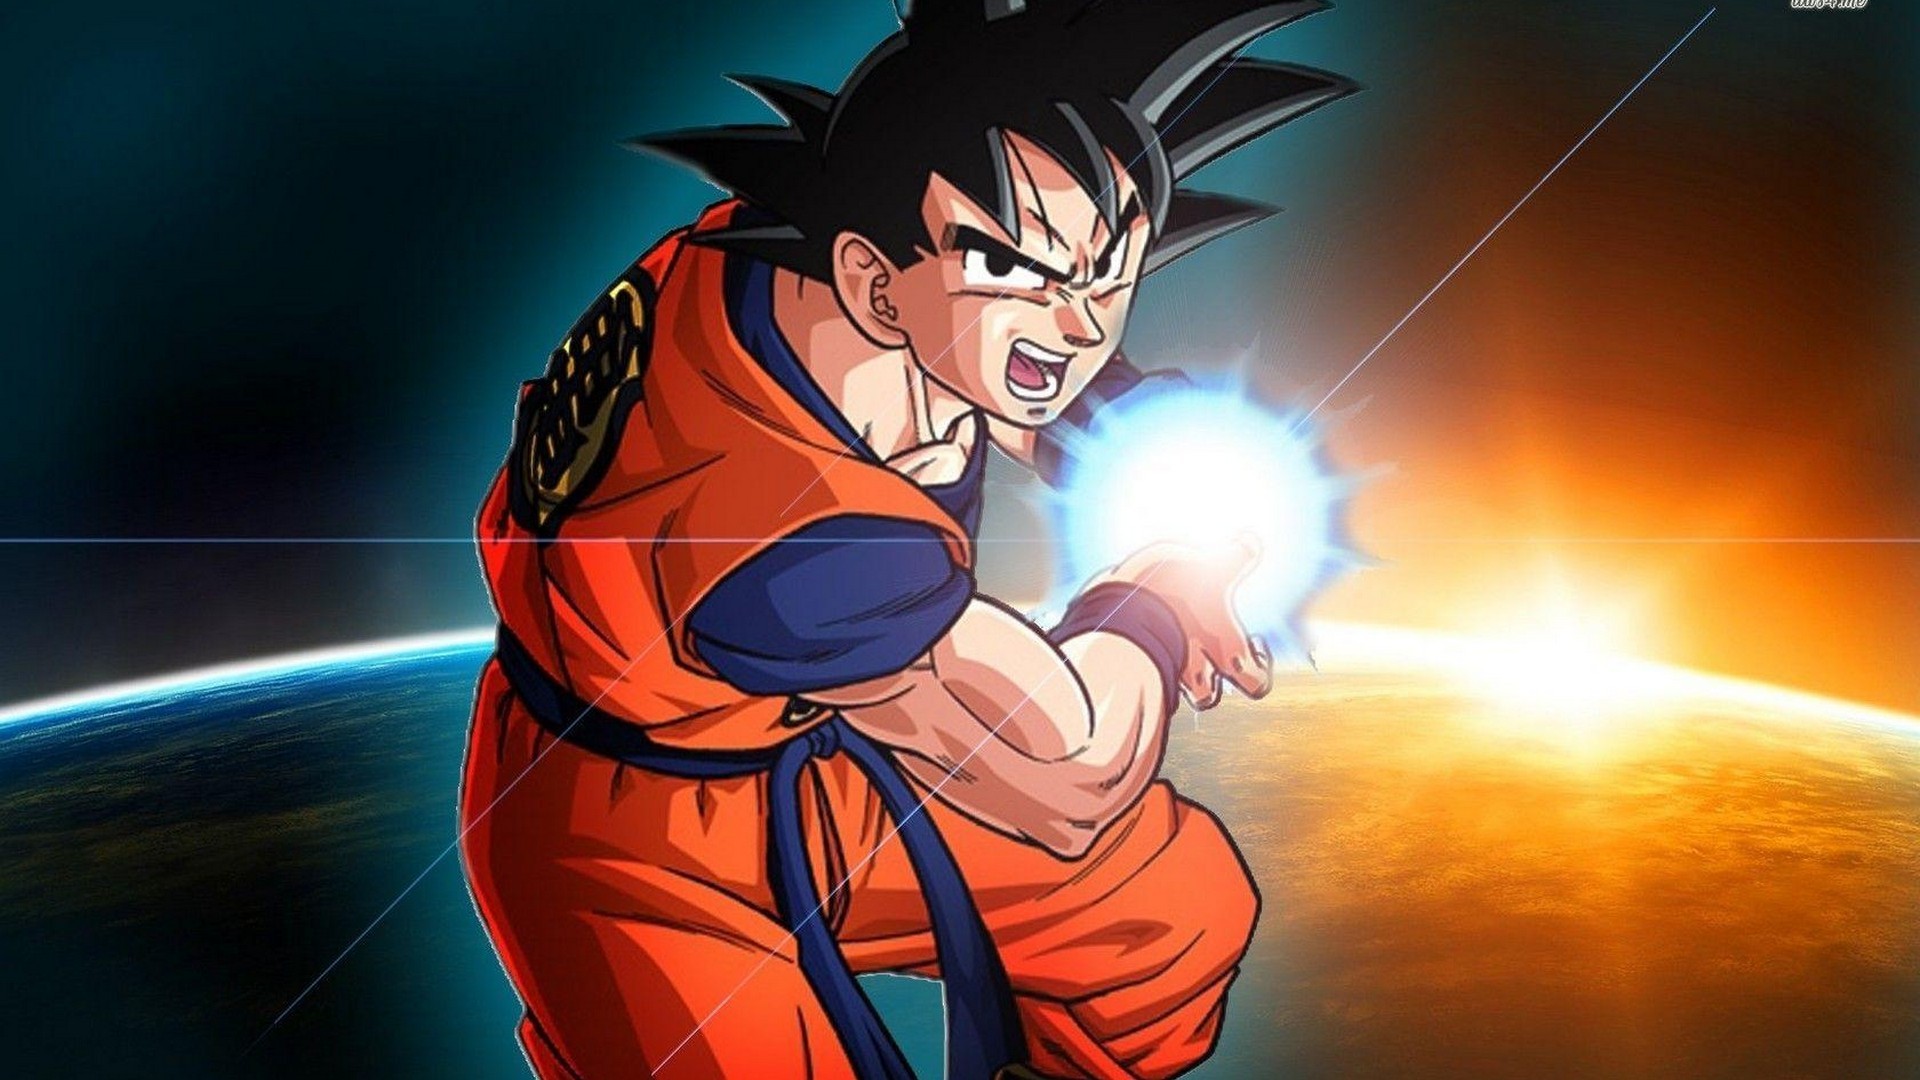 Goku Images Desktop Backgrounds HD with image resolution 1920x1080 pixel. You can use this wallpaper as background for your desktop Computer Screensavers, Android or iPhone smartphones